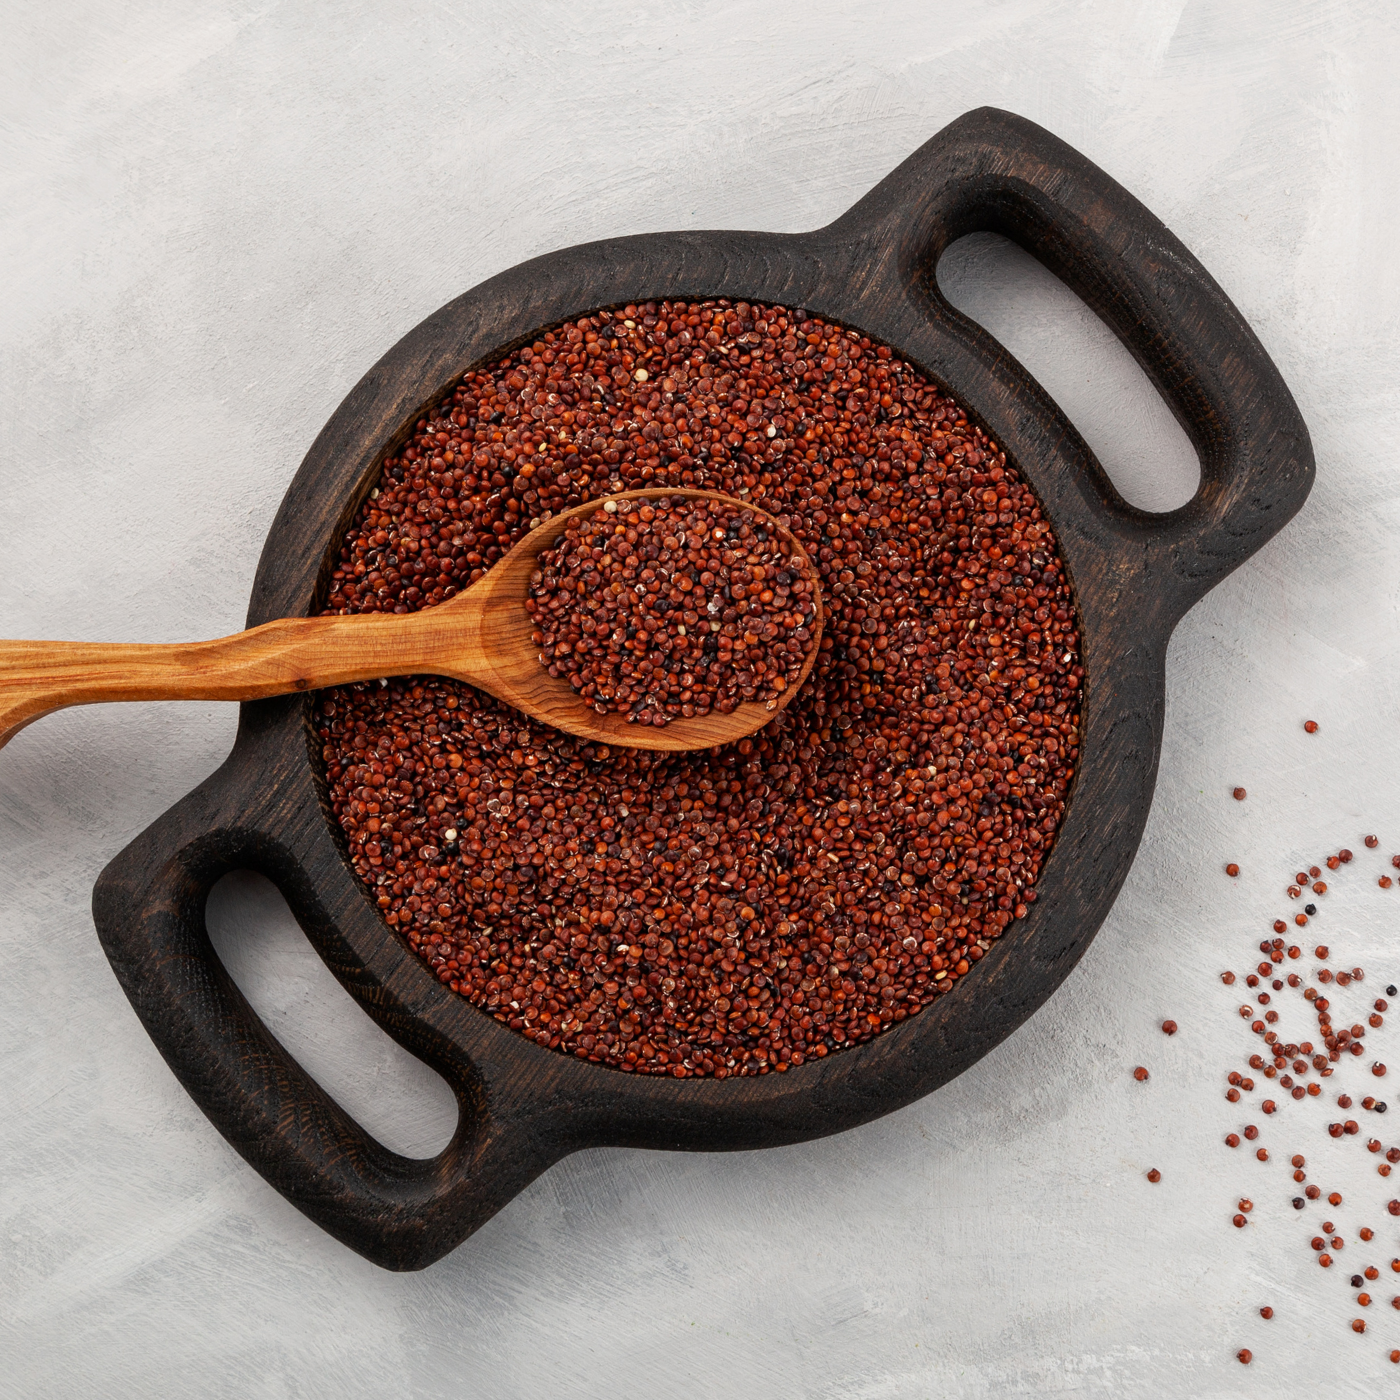 Ragi: The Nutrient-Packed Wonder Grain You Should Include in Your Diet